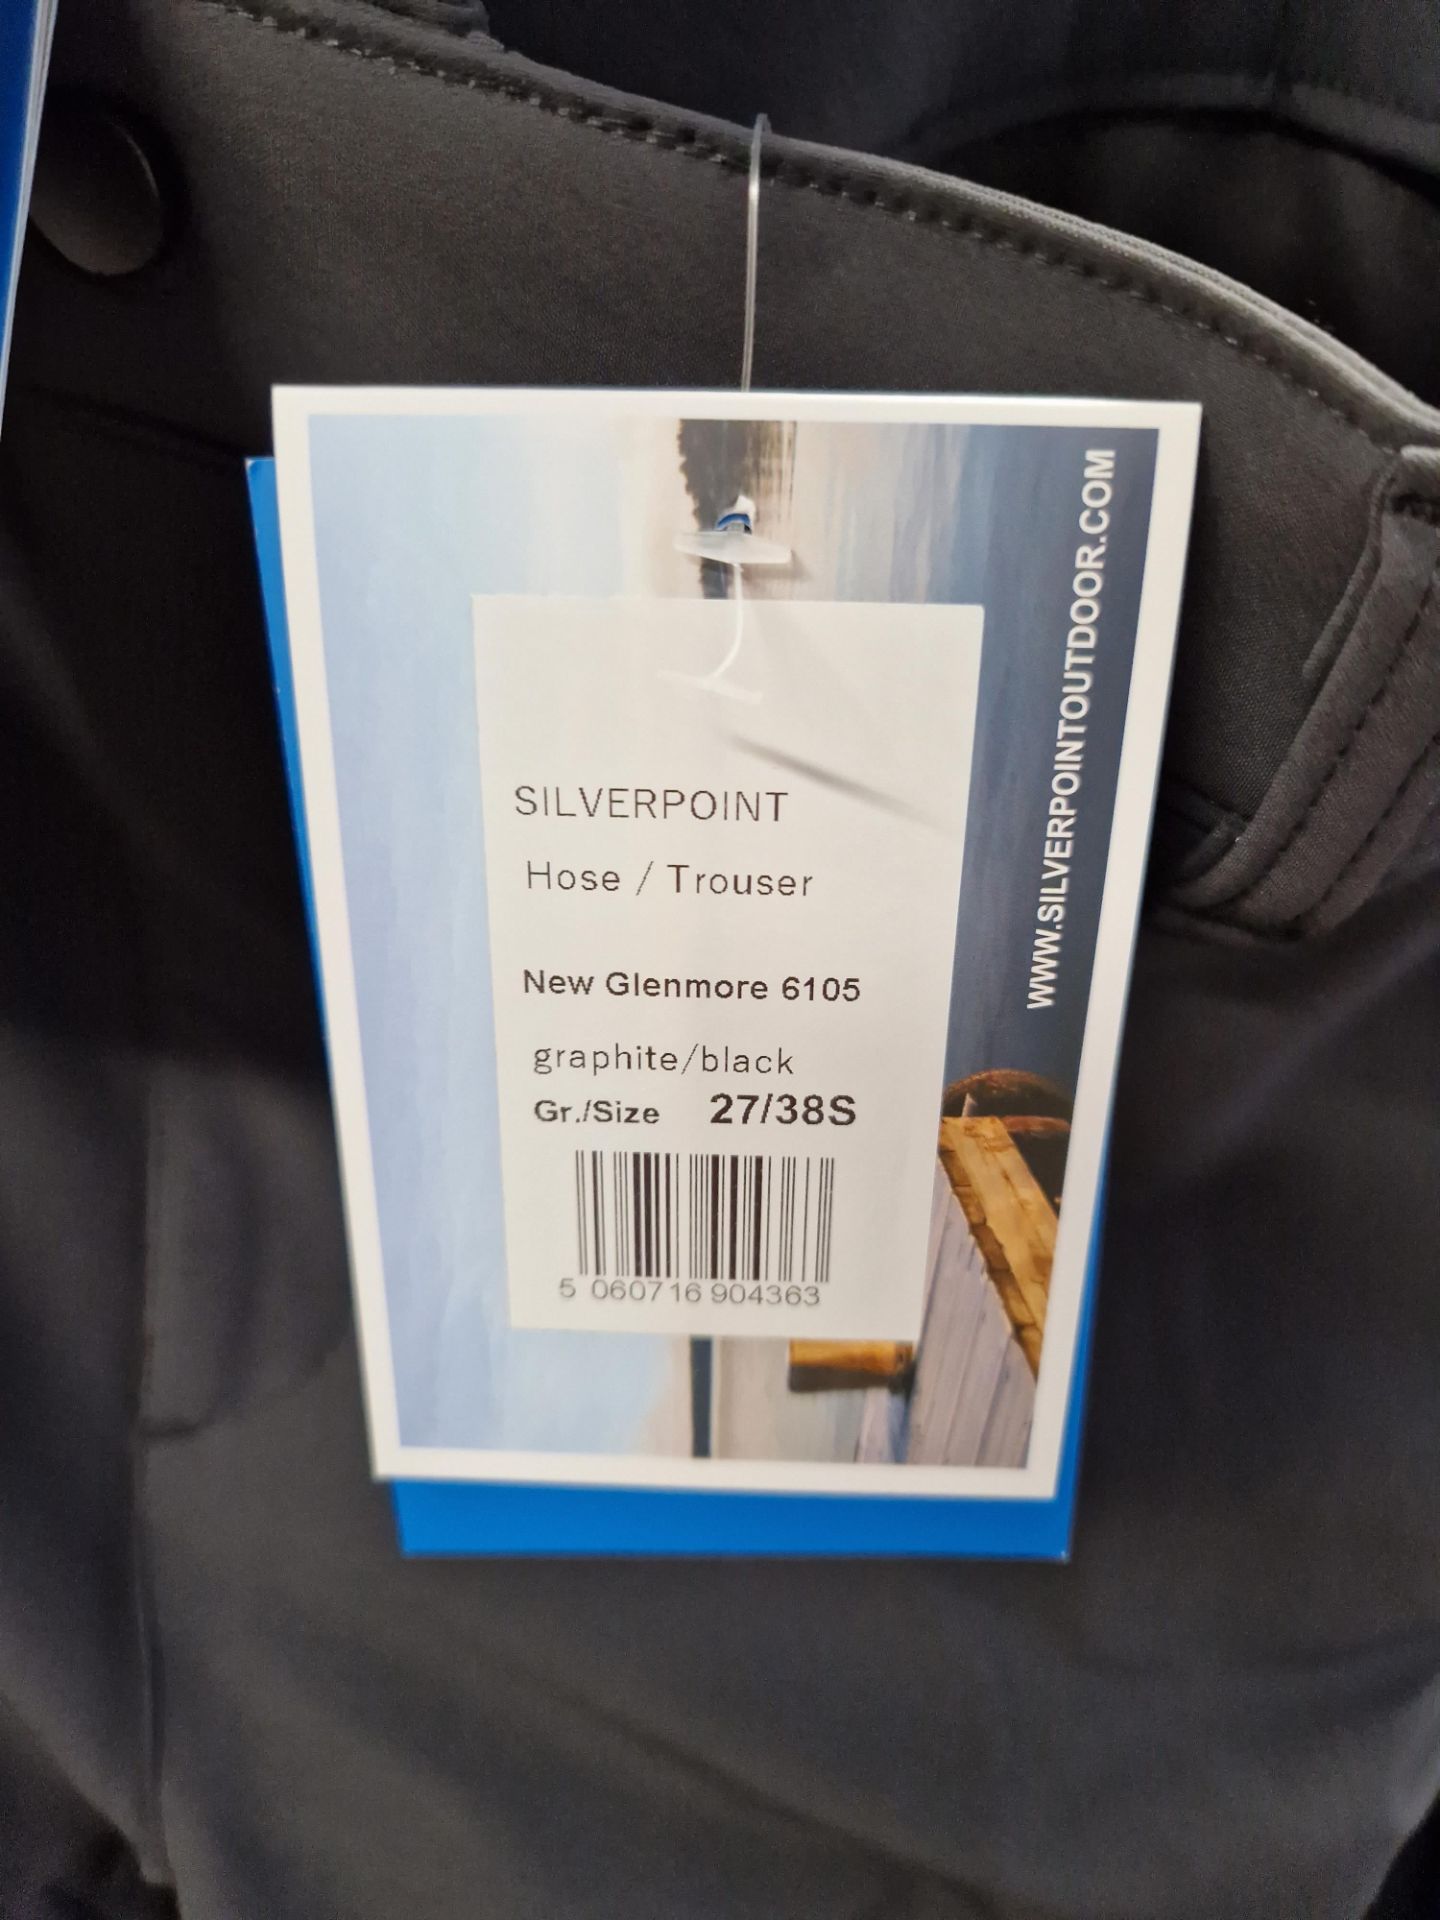 Four Silverpoint New Glenmore 6105 Waterproof Trousers, Colour: Graphite Grey, Sizes: 54/38, 28/40S, - Image 2 of 2